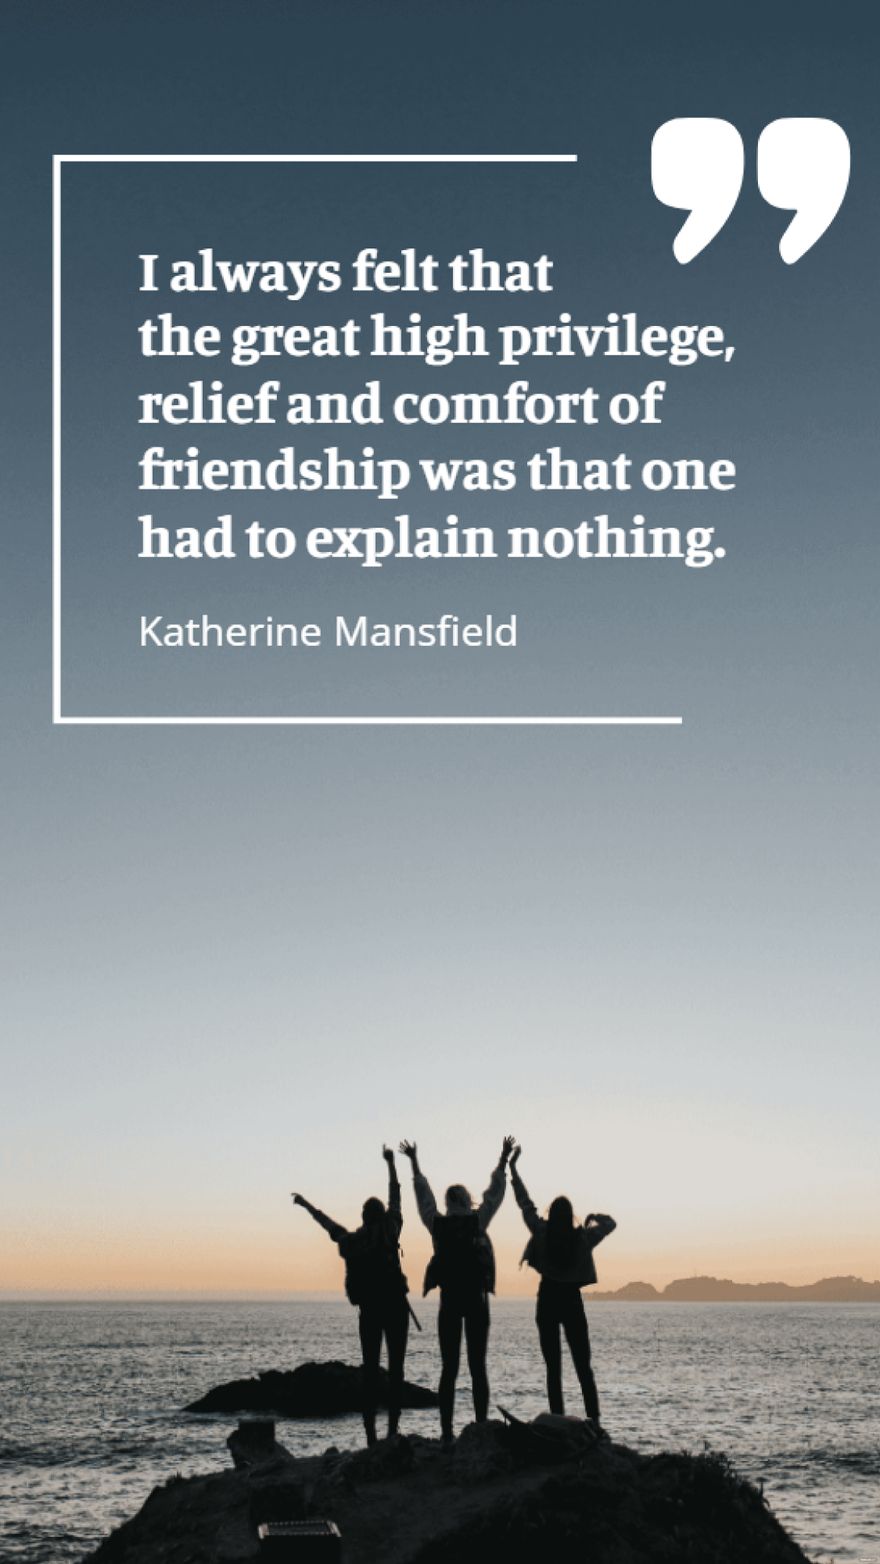 Katherine Mansfield - I always felt that the great high privilege, relief and comfort of friendship was that one had to explain nothing. in JPG